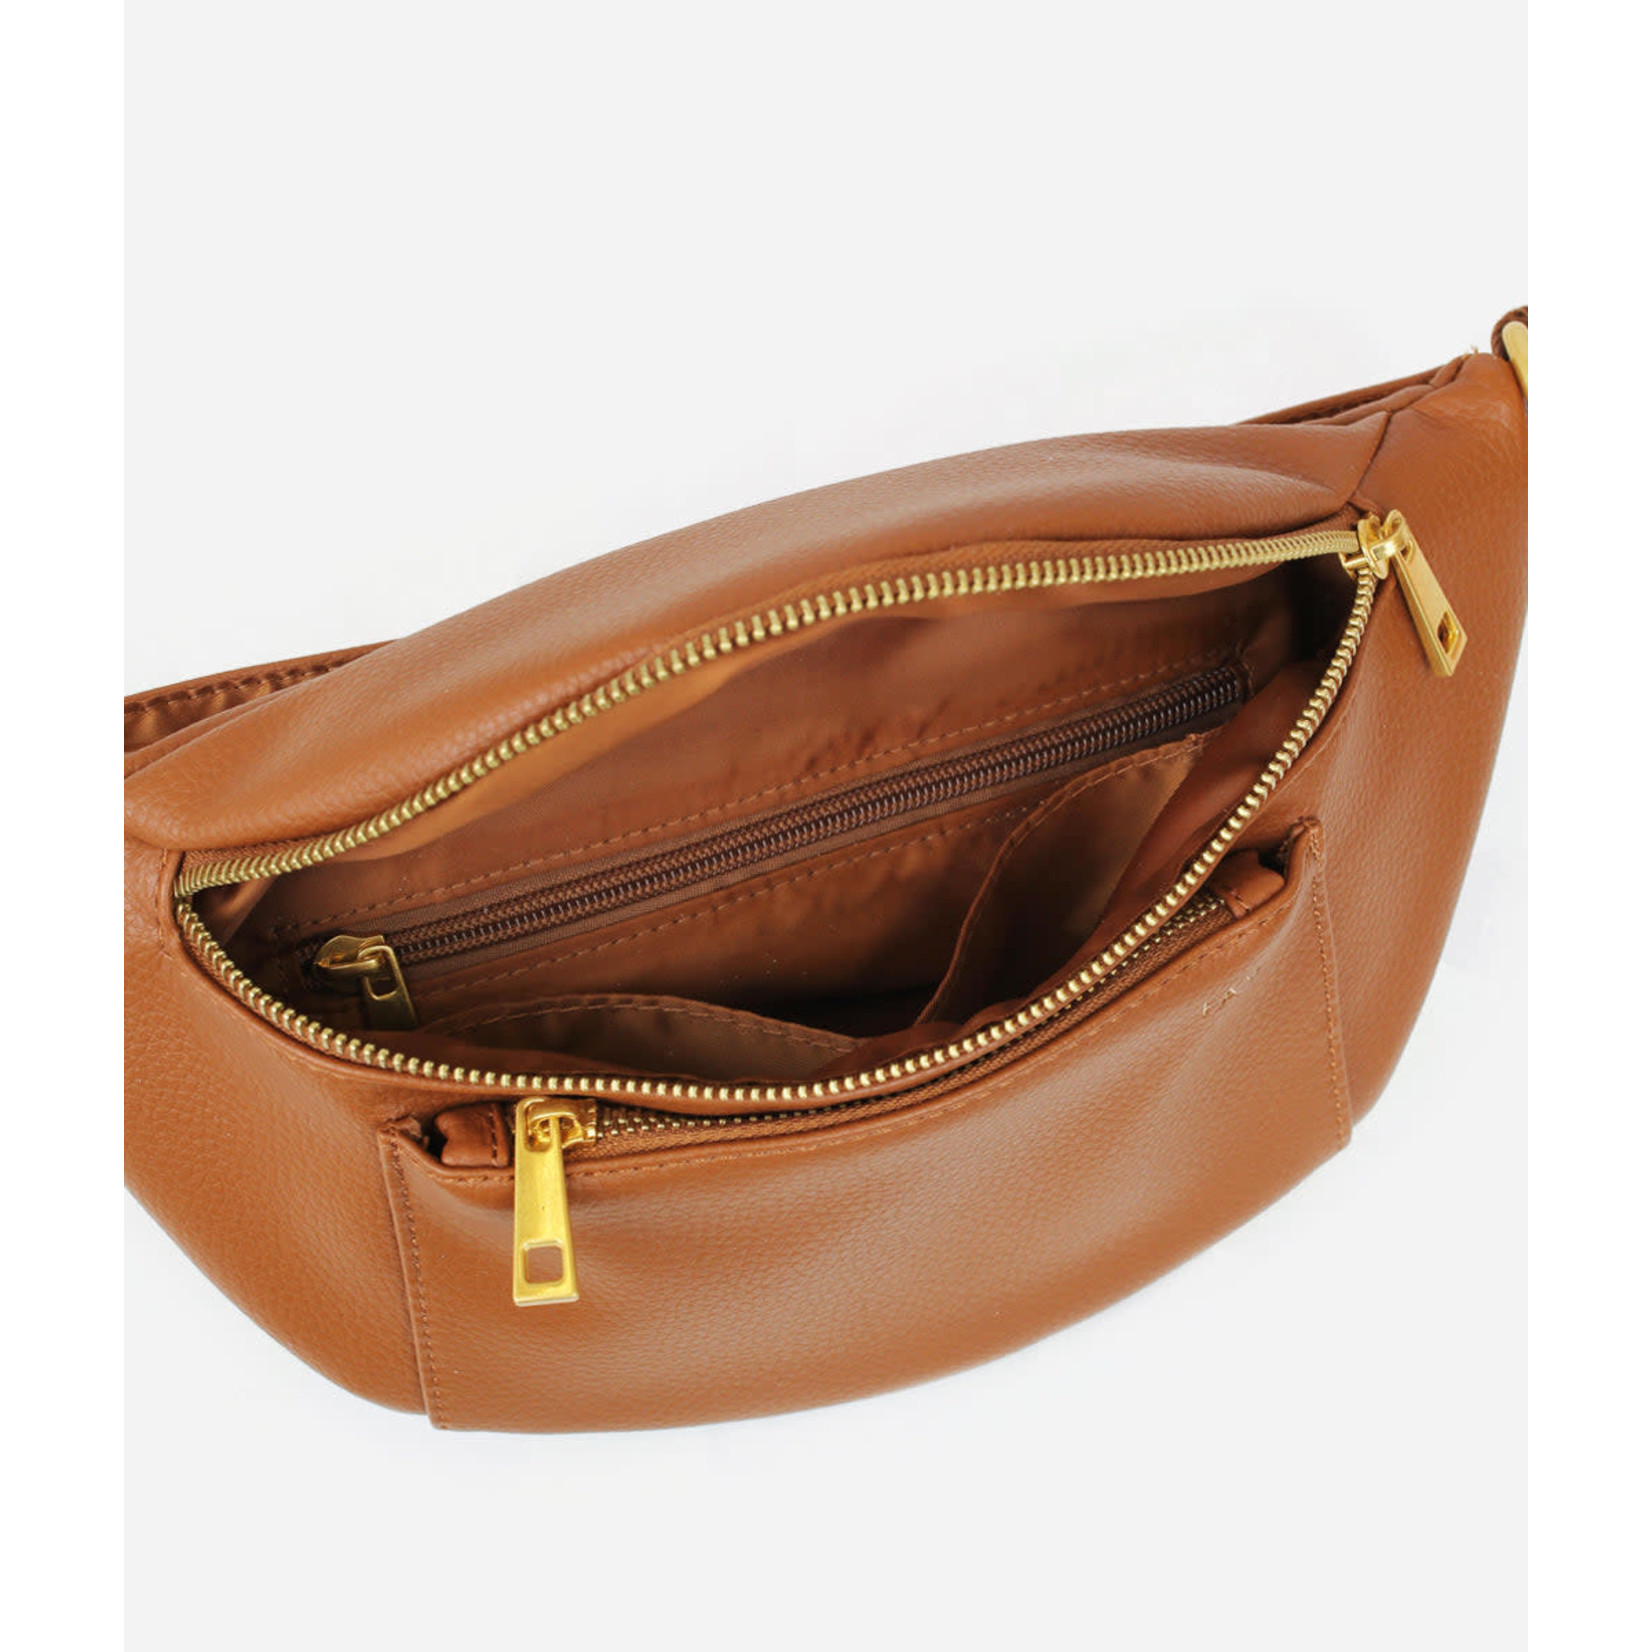 Fawn Design, Bags, Fawn Design Black Fanny Pack